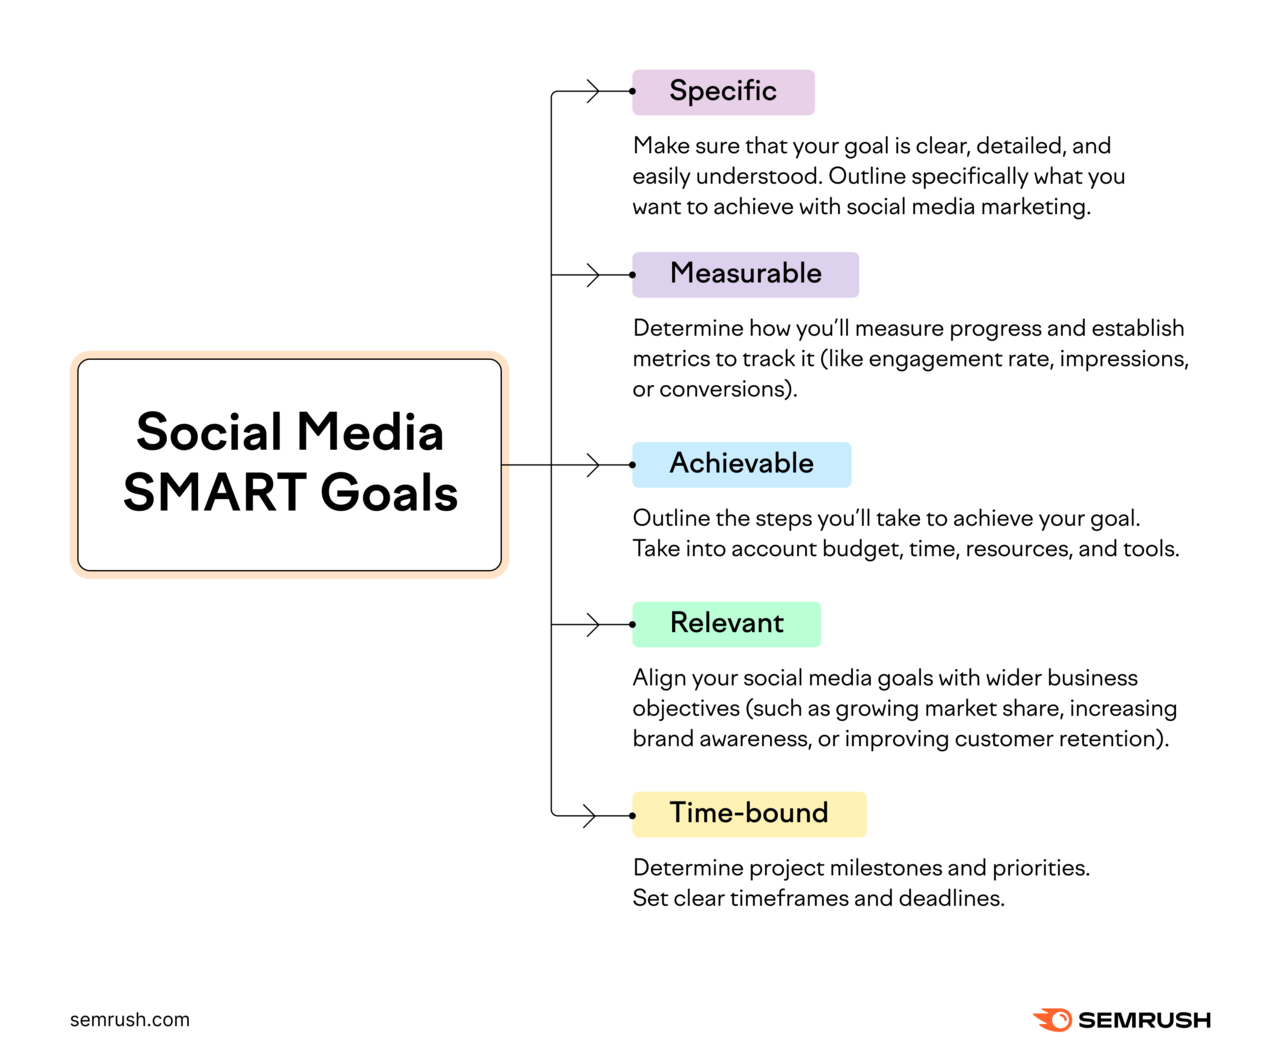 Smart social media goals are specific, measurable, achievable, relevant, and time-bound.